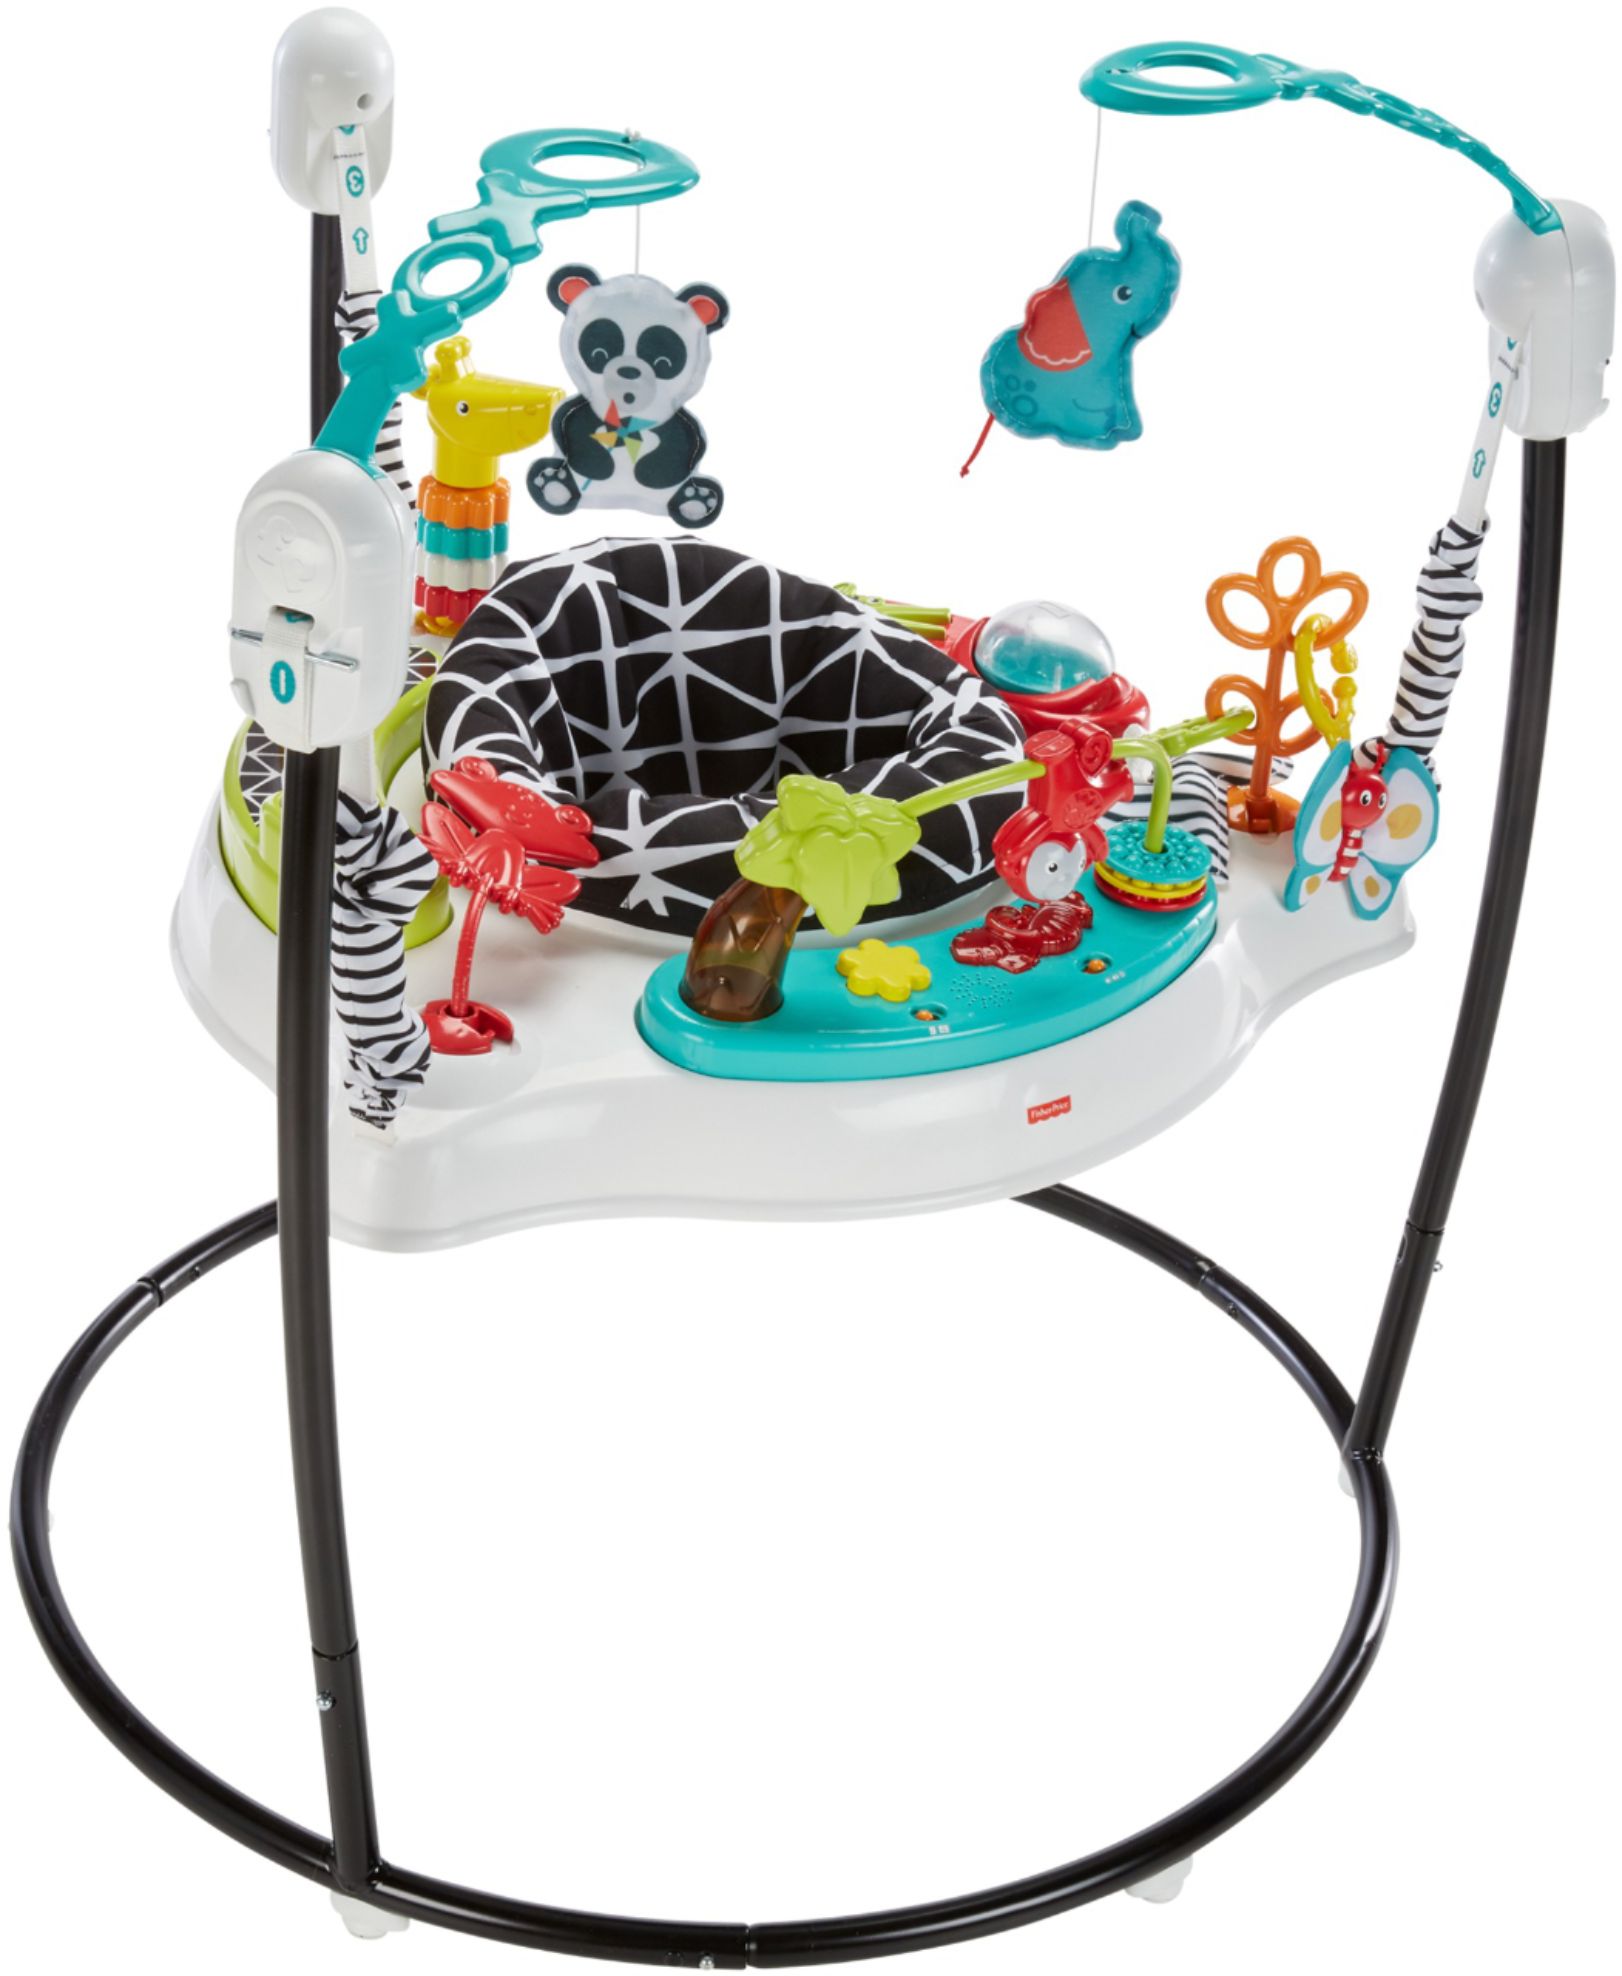 Angle View: Fisher-Price - 4-in-1 Sling 'n Seat Tub - White/Green